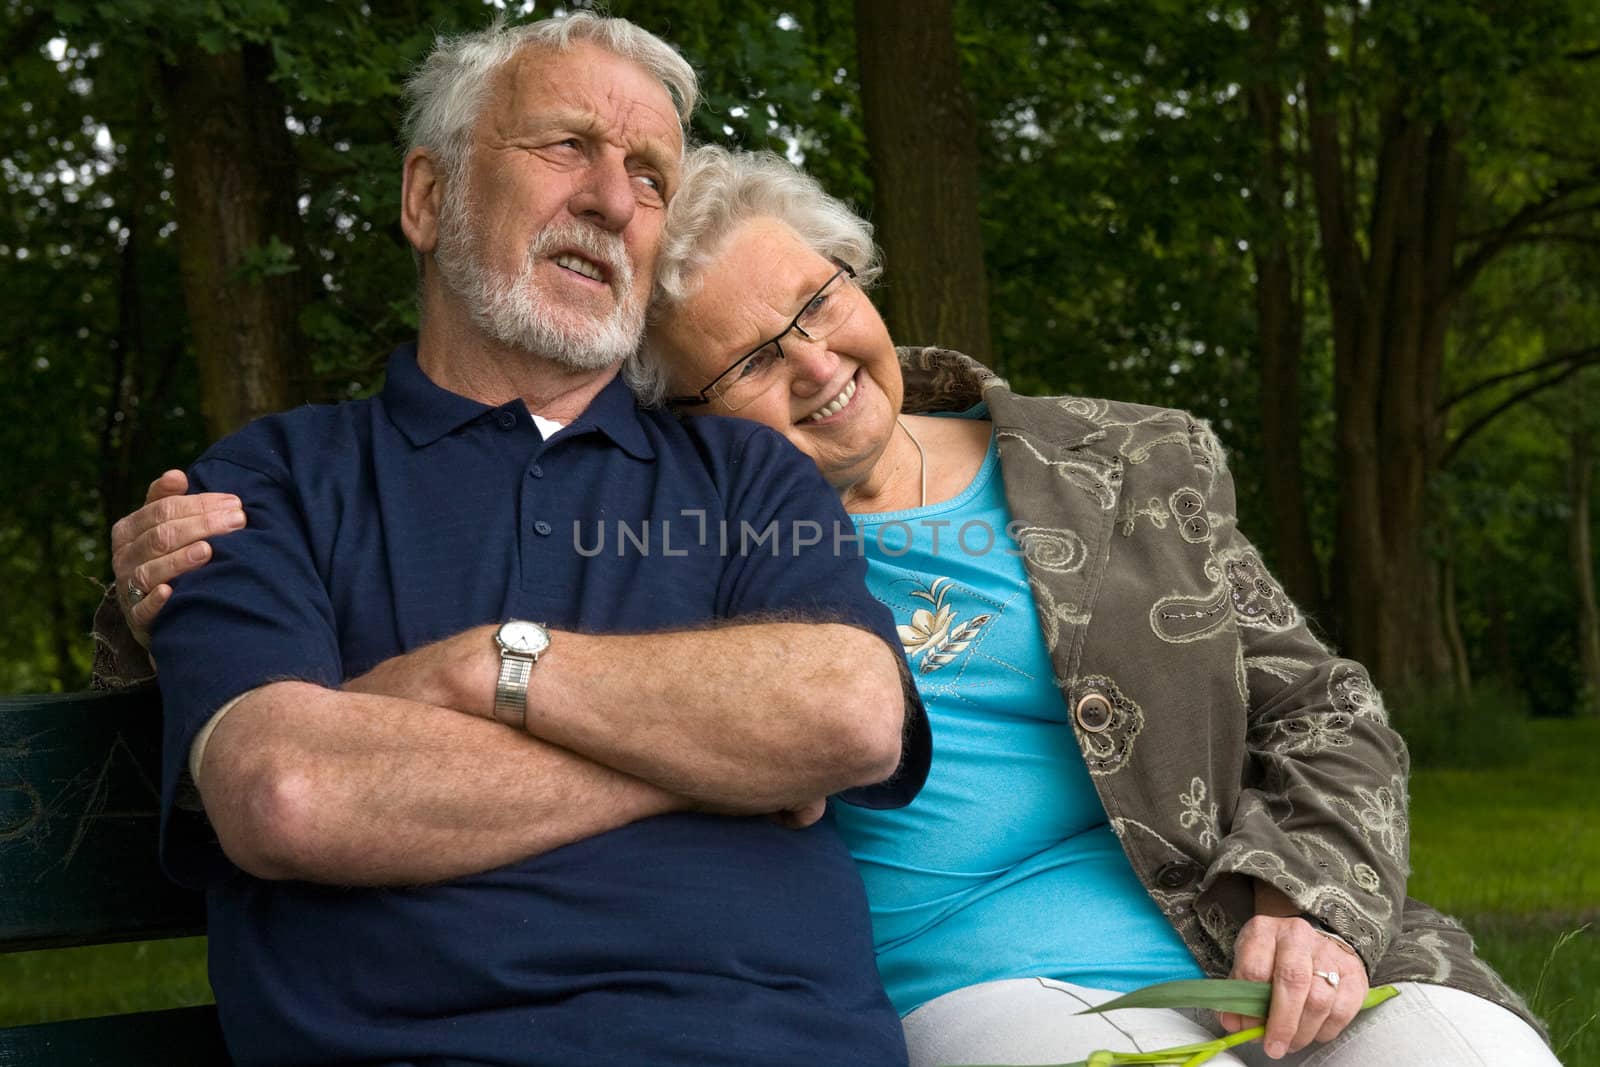 Outside portrait of an elderly couple on a bench